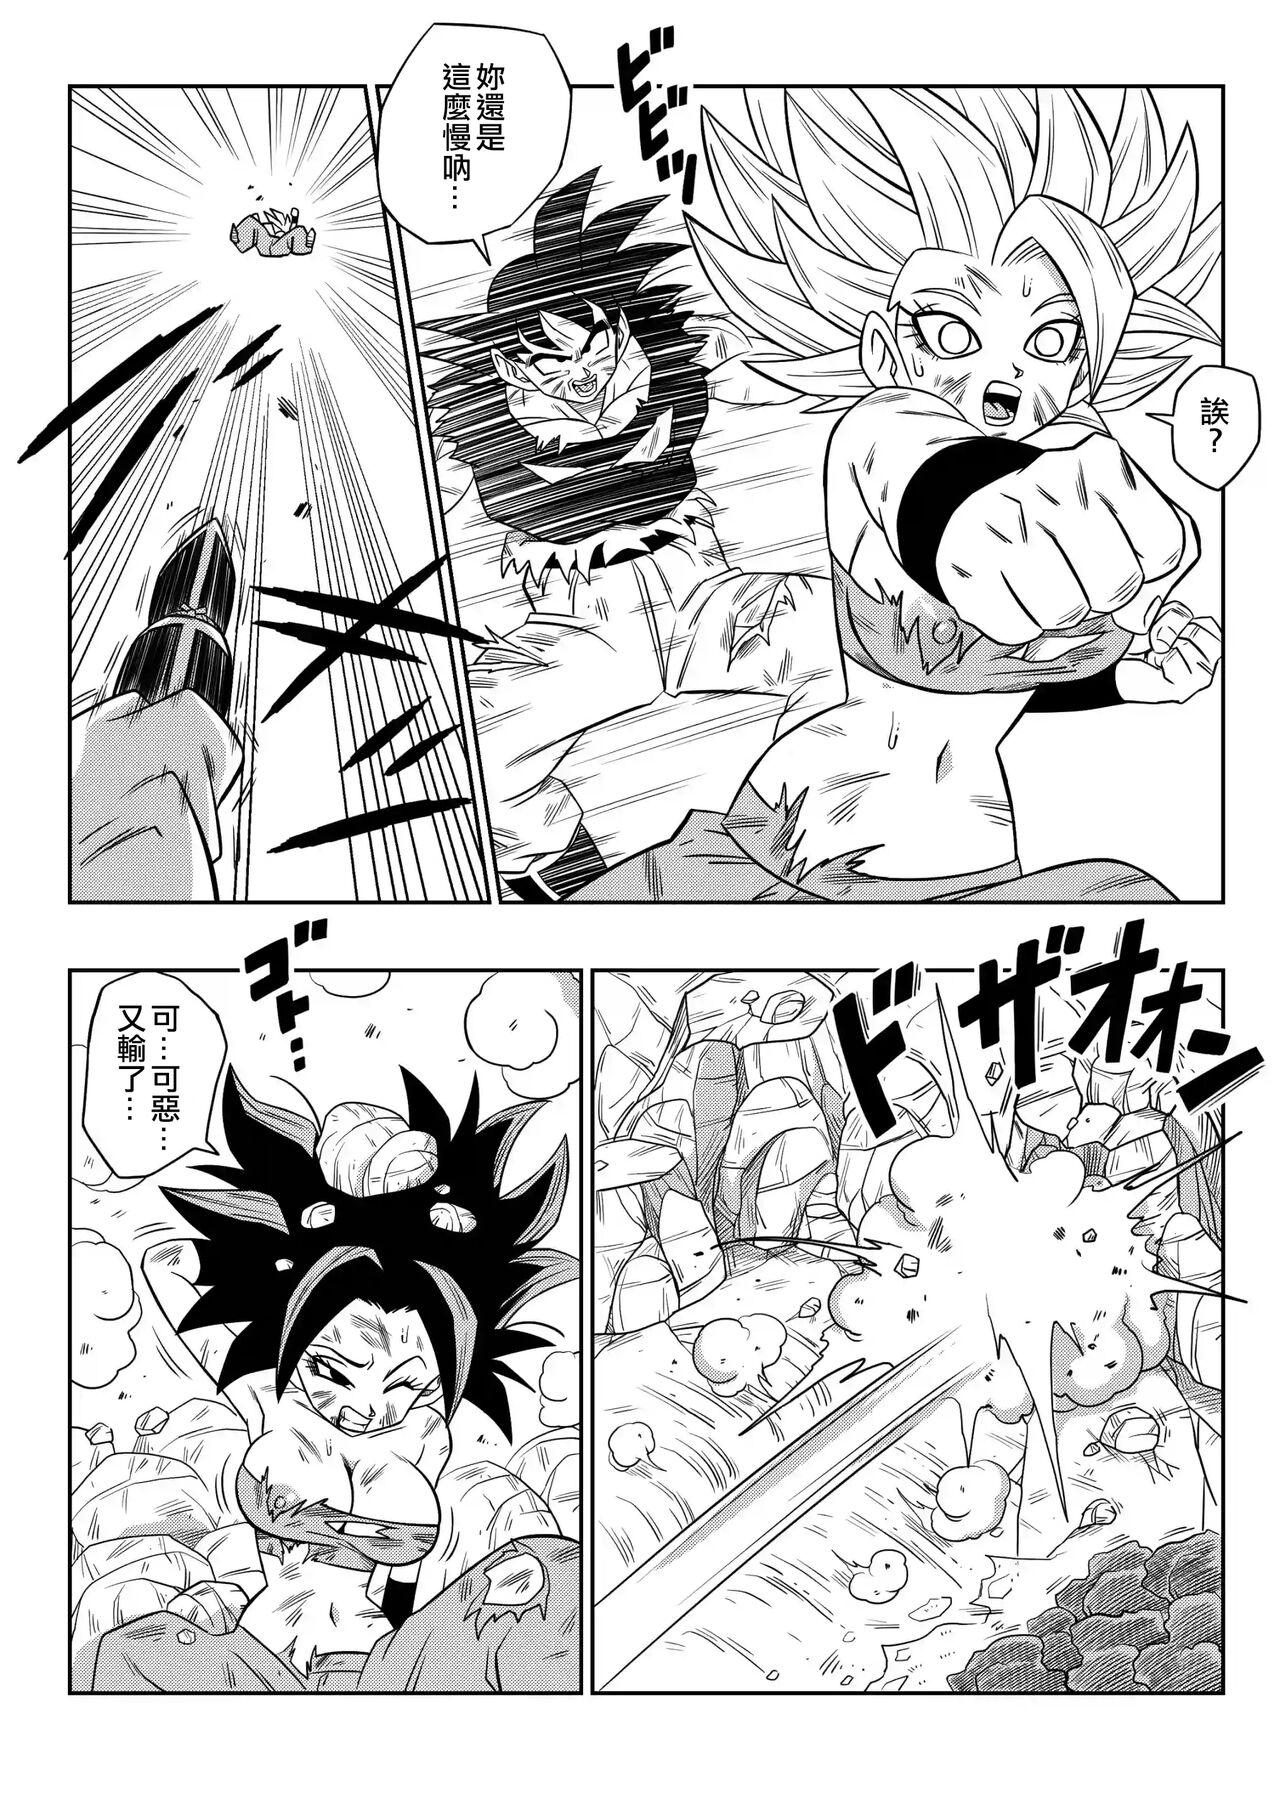 Wet Pussy Fight in the 6th Universe!!! - Dragon ball super Mas - Page 5